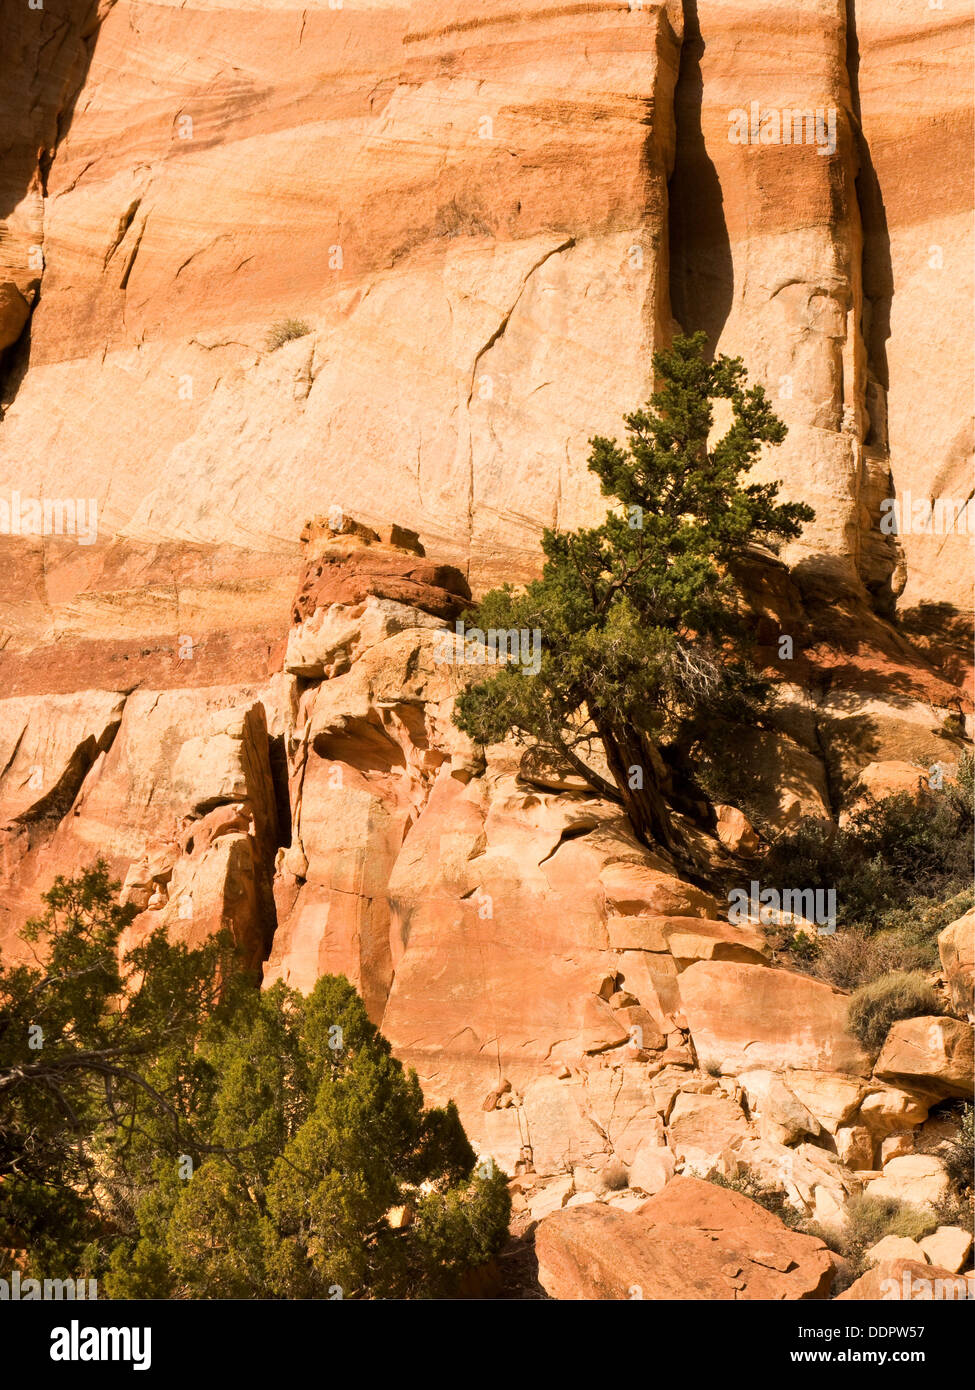 Land of the Sleeping Rainbow canyon: green pine tree outlined against dramatic striped orange and brown rock of rockface behind, Stock Photo